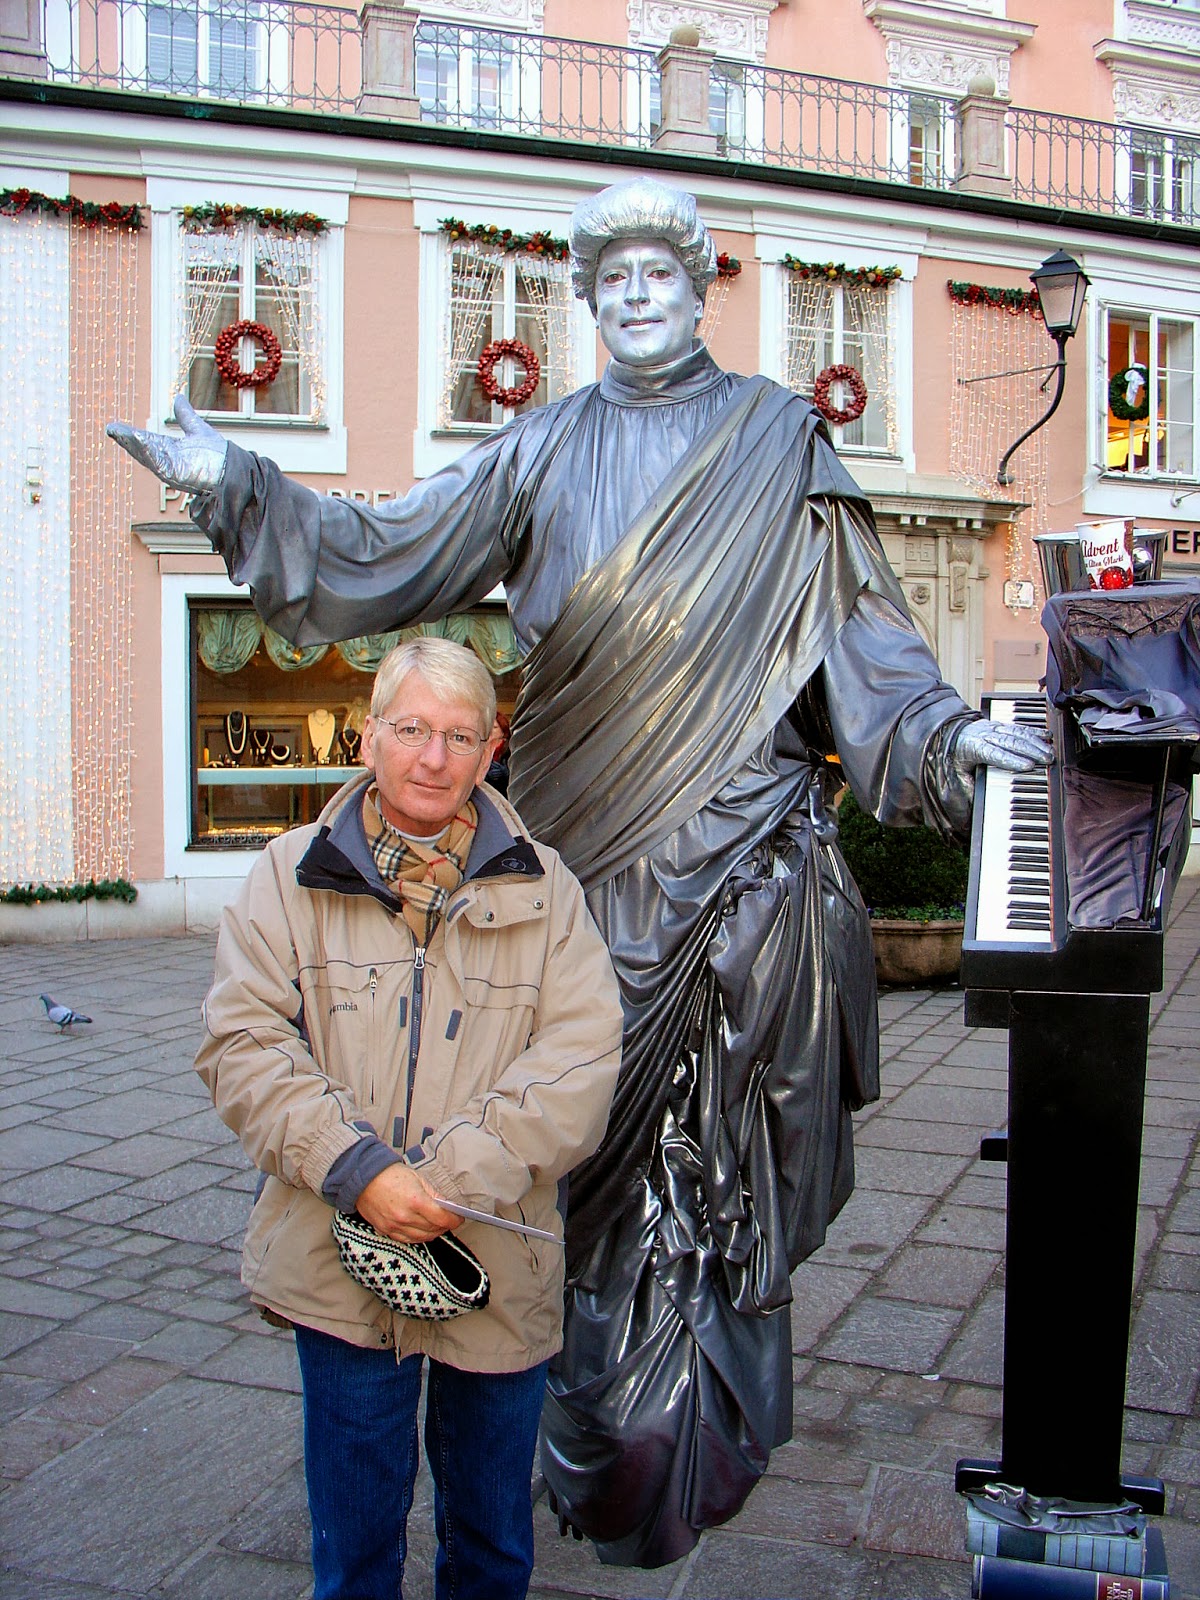 Having fun with the living statues in Salzburg. Here's Matthew with a floating Mozart?